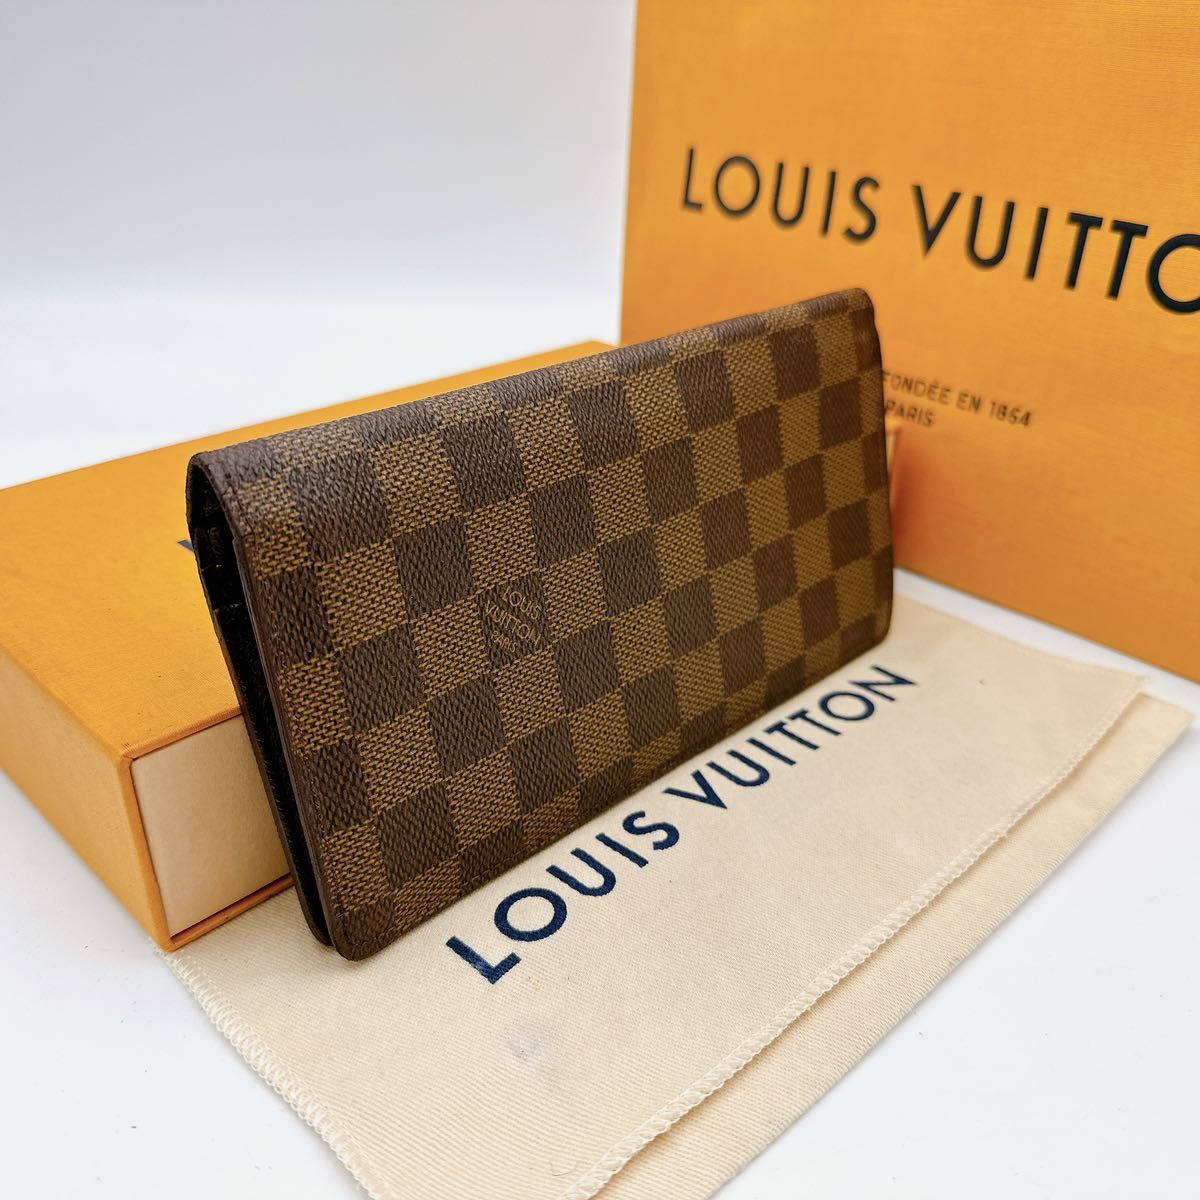 A2167【美品】LOUIS VUITTON ルイヴィトン ダミエ ポルトフォイユ